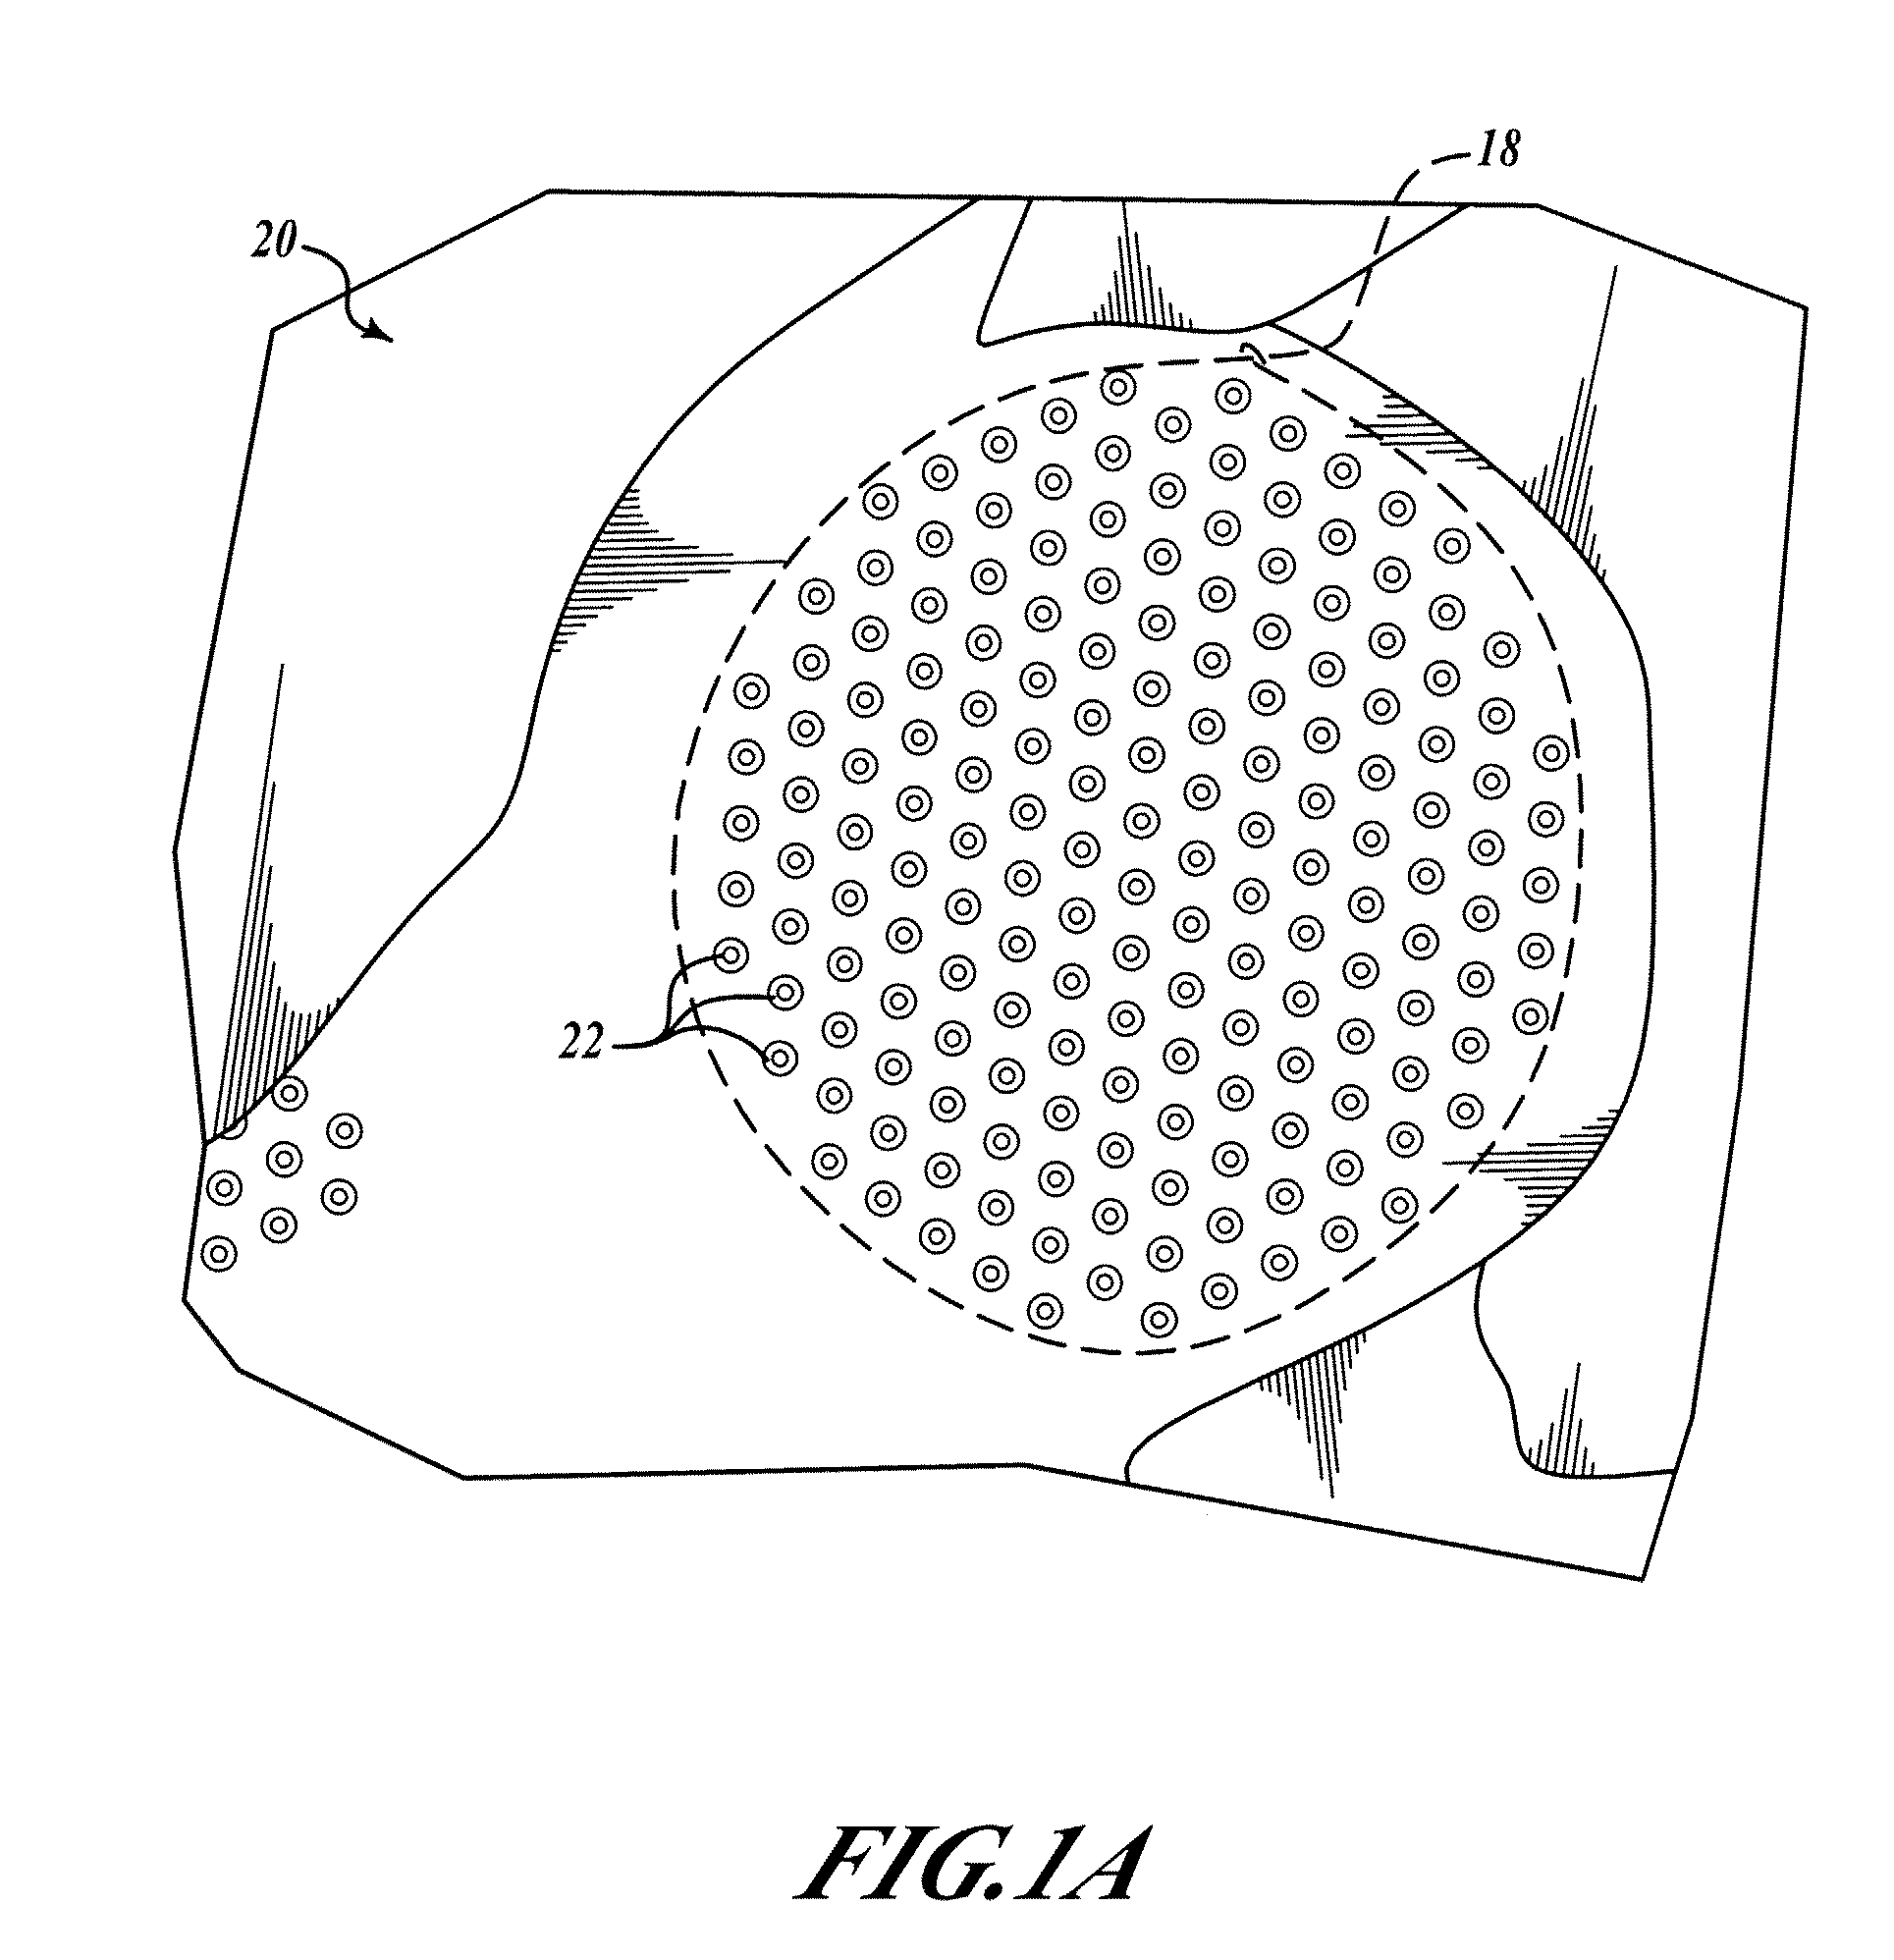 Method for providing an efficient thermal transfer through a printed circuit board